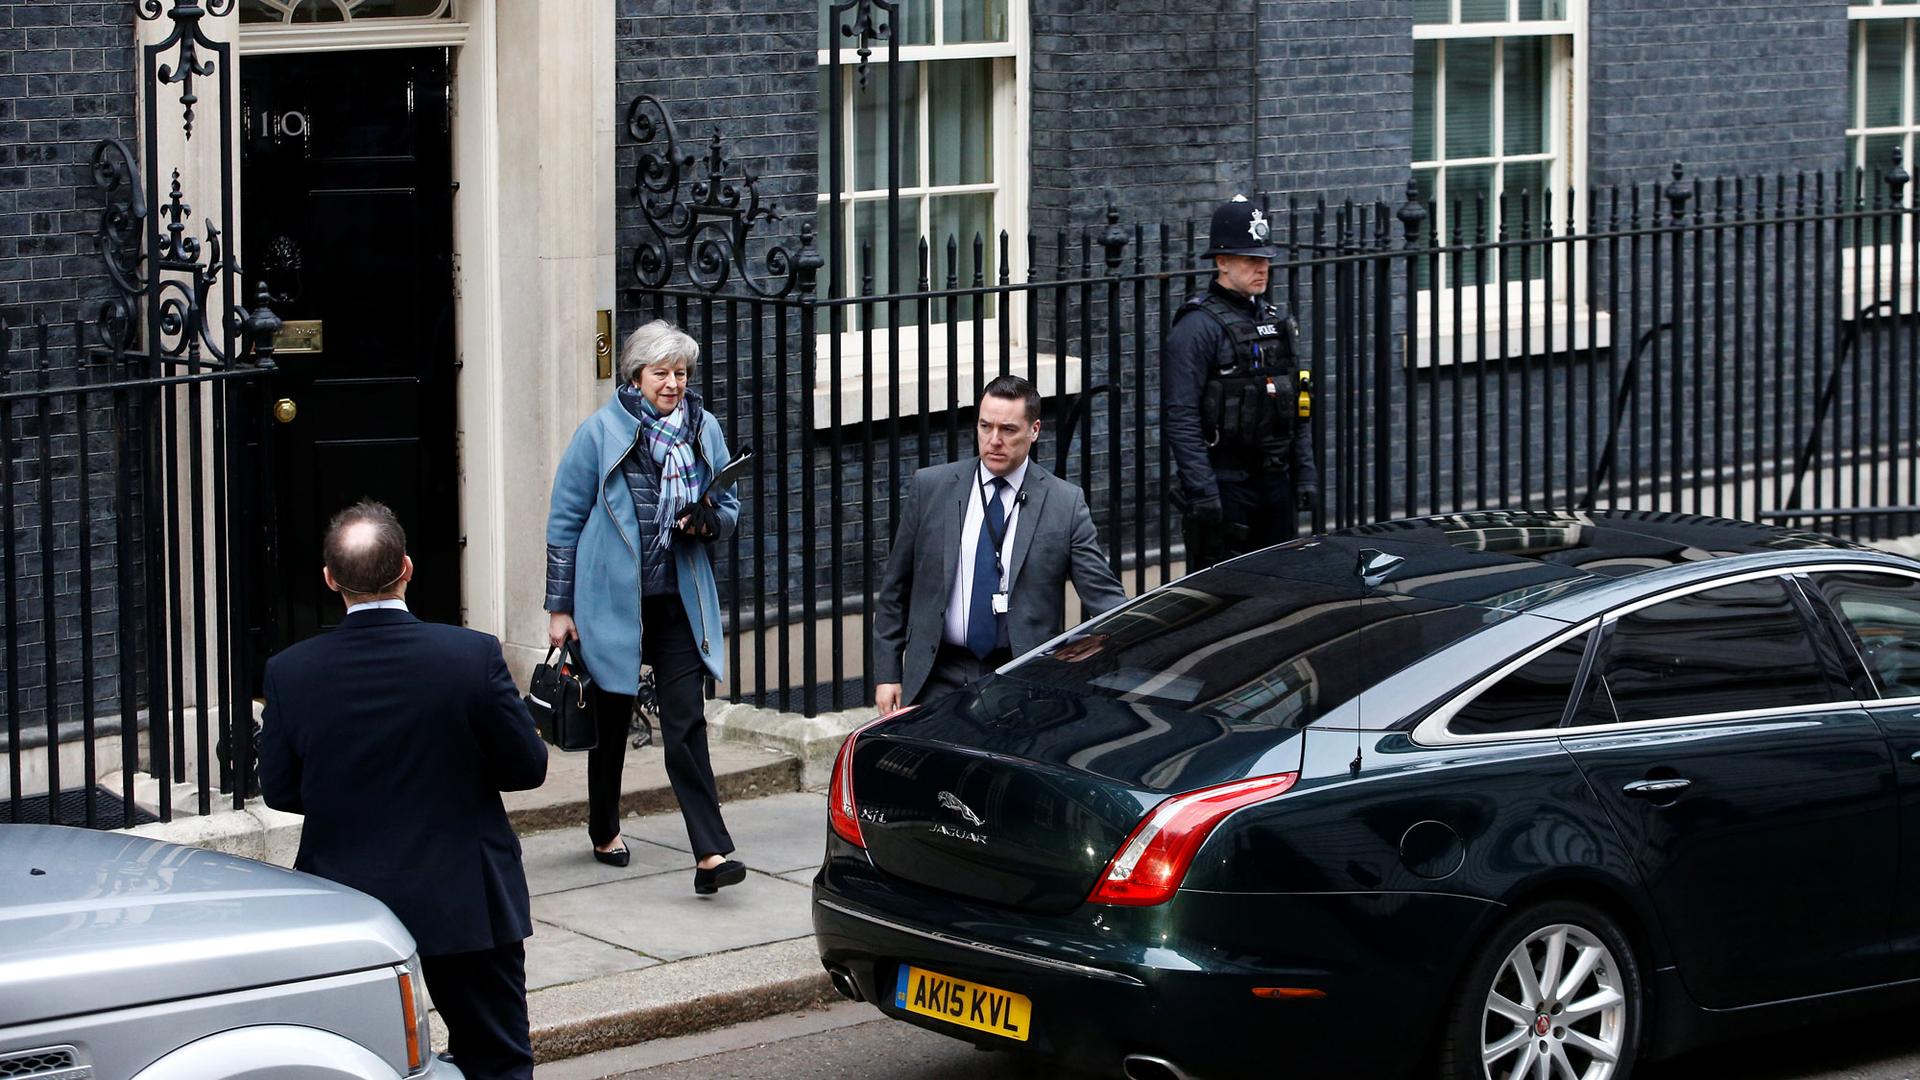 Britain's Prime Minister Theresa May is shown in a blue jacket and scarf walking out of 10 Downing Street to a car.